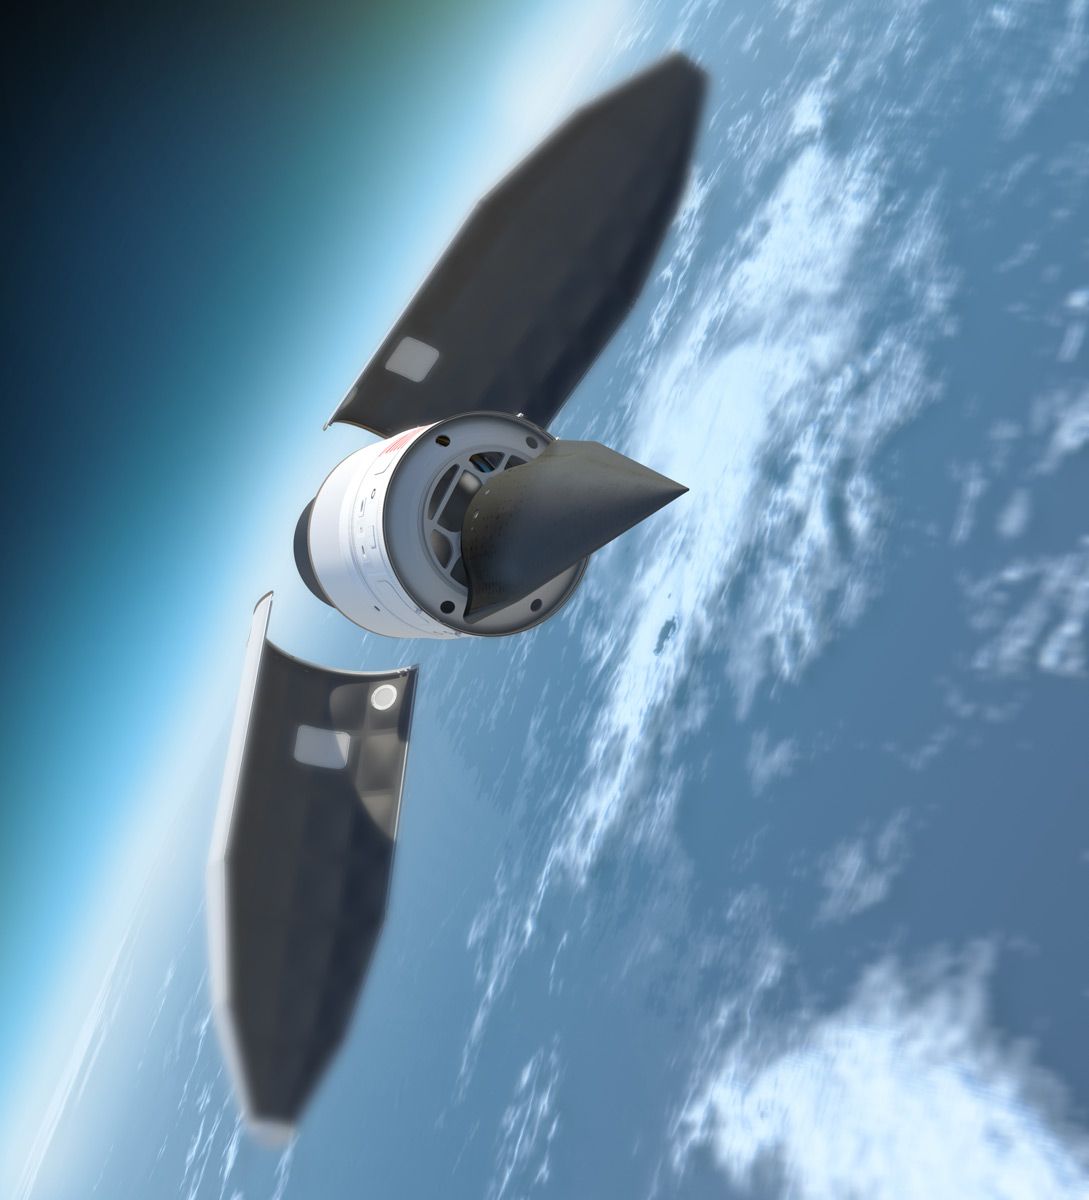 Us Military Video Shows Hypersonic Aircraft Test Flight Space